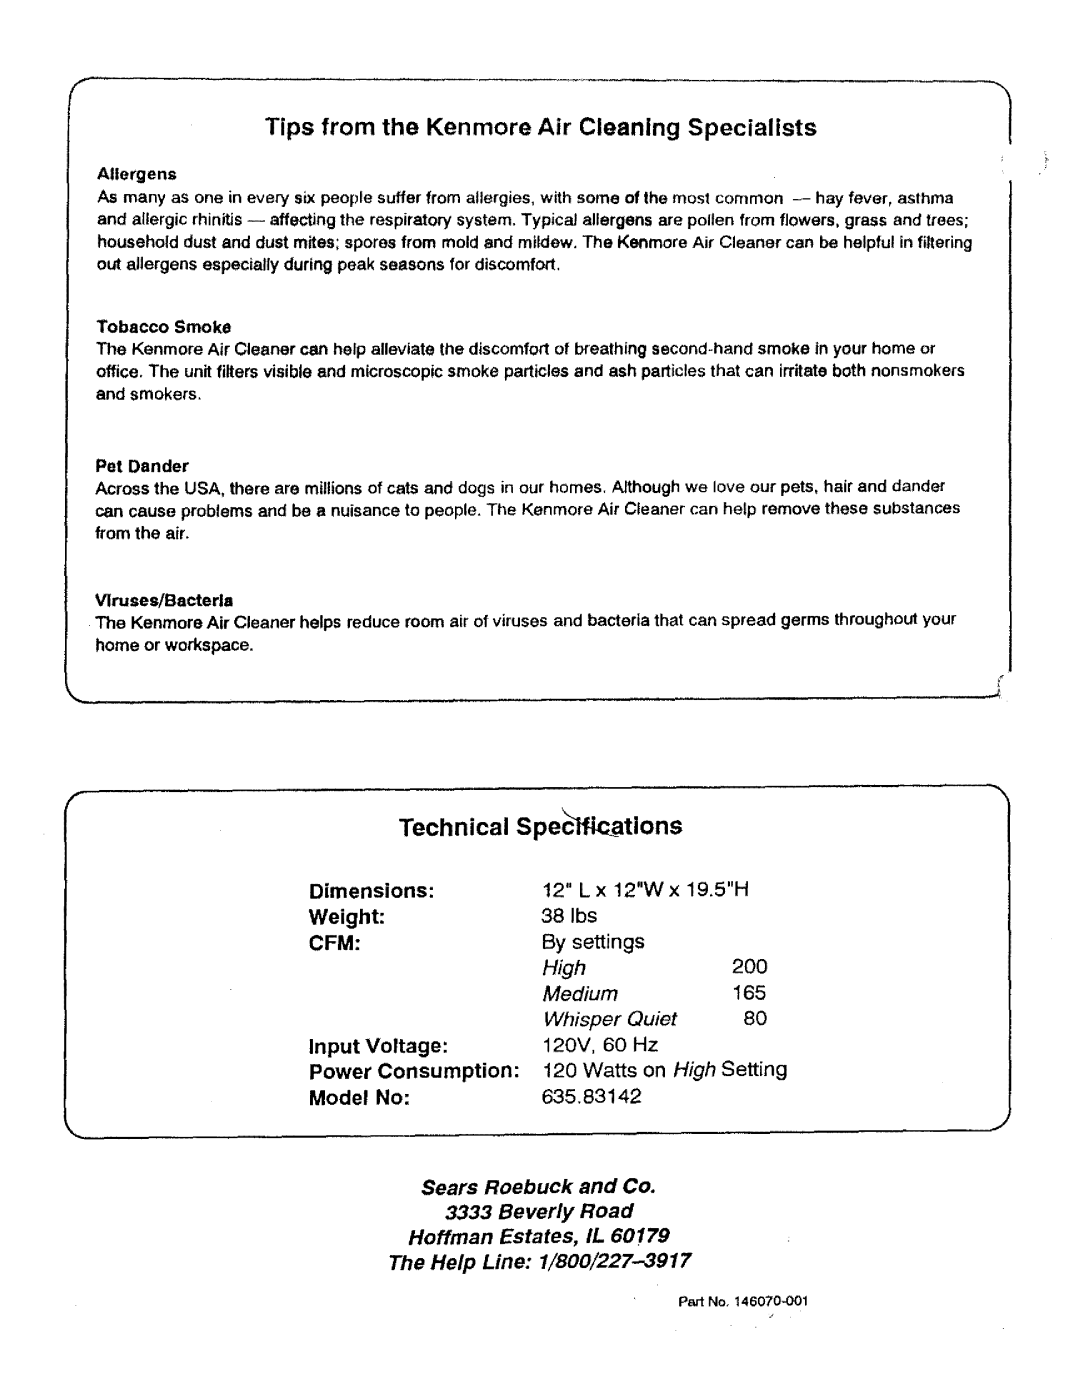 Sears 635.83142 Tips from the Kenmore Air Cleaning Specialists, Technical, Speclfications, Dimensions, Weight, Ibs, Input 